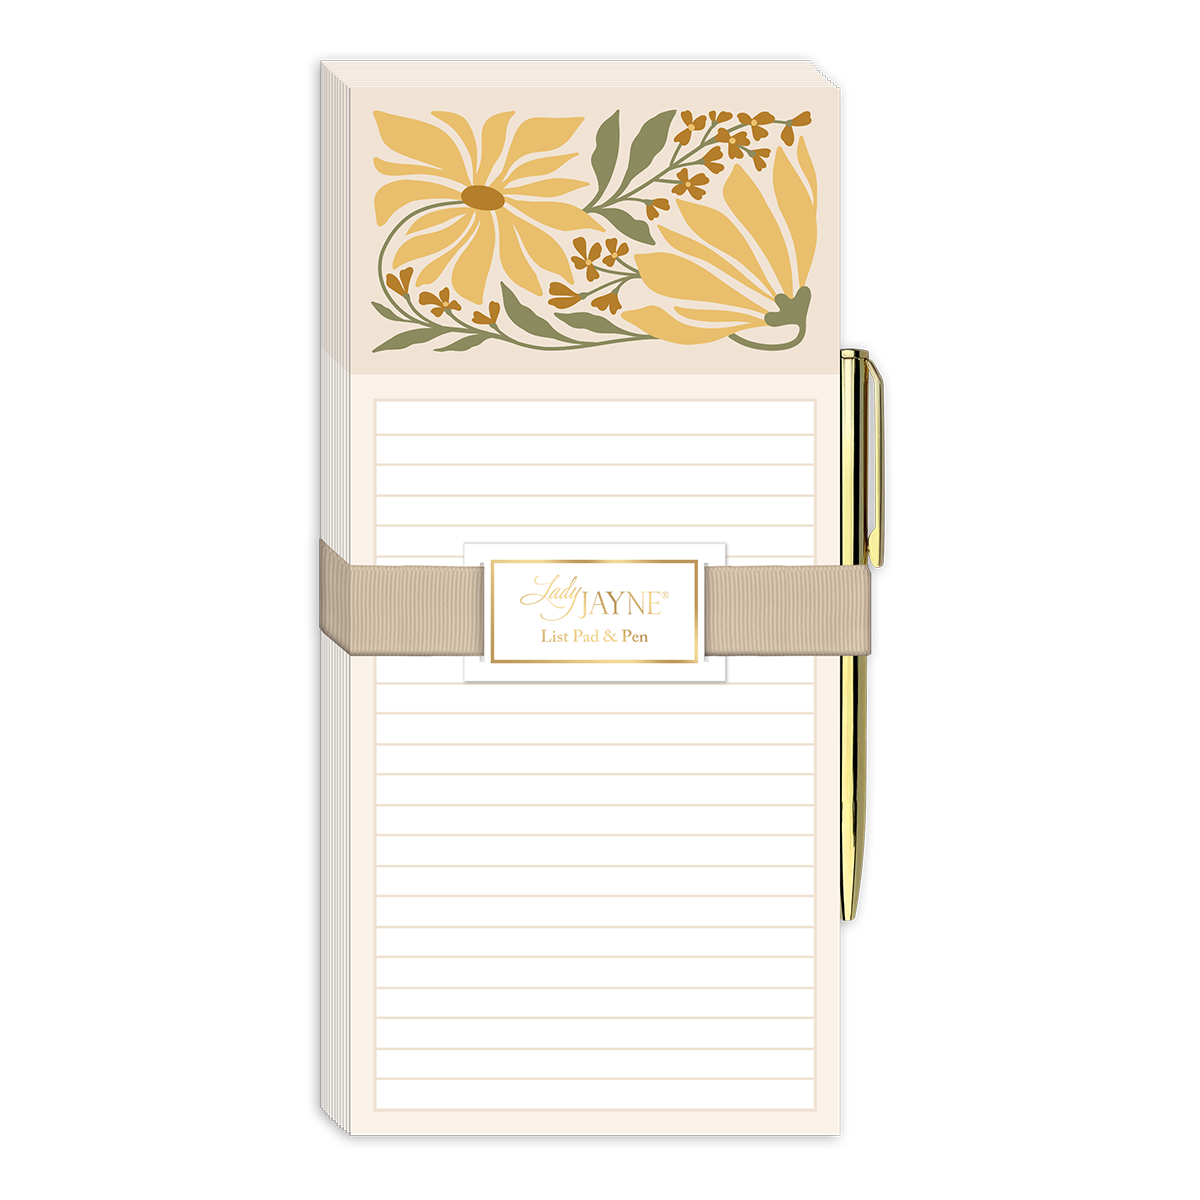 Flower Market Sunflower Magnetic List Pad With Pen Product